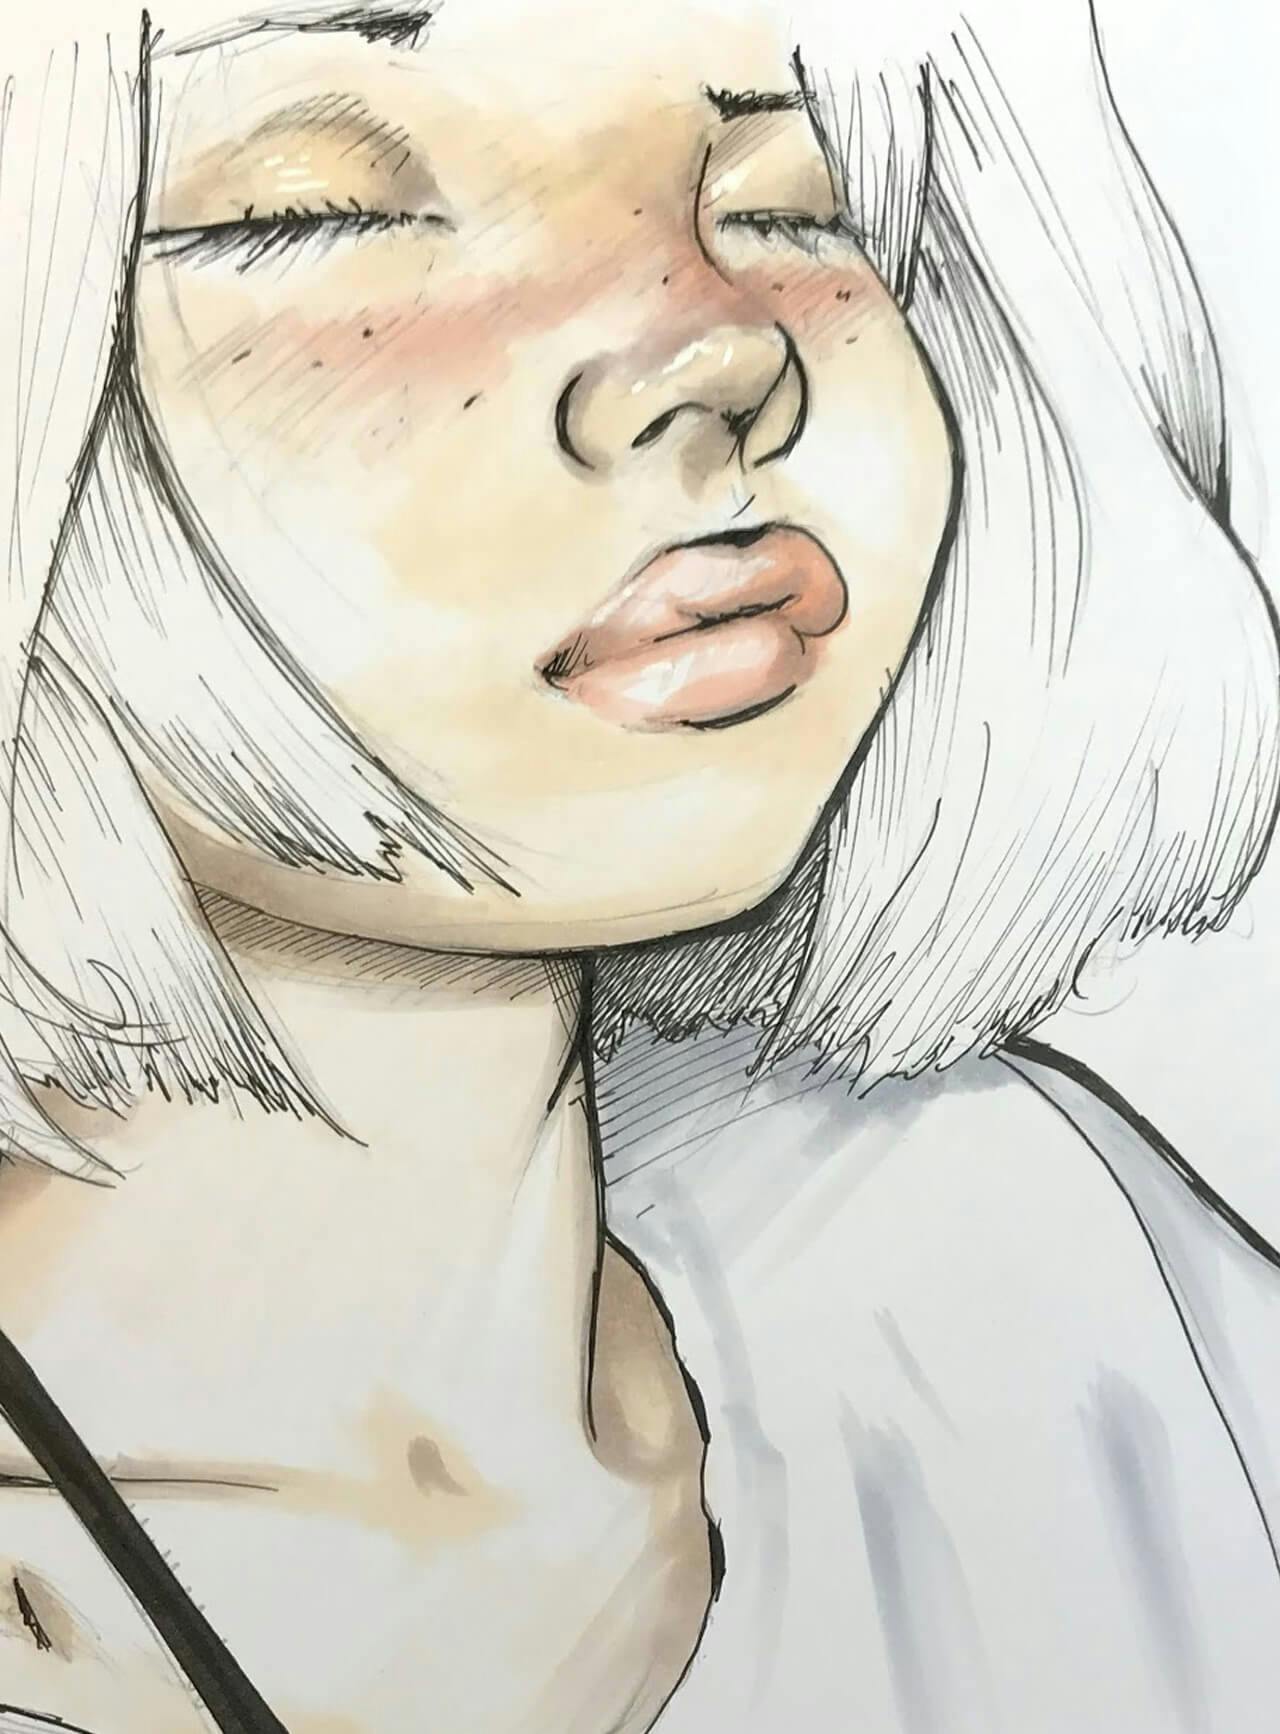 Ink & marker sketch of girl in close-up, eyes closed in white shirt, three quarter view